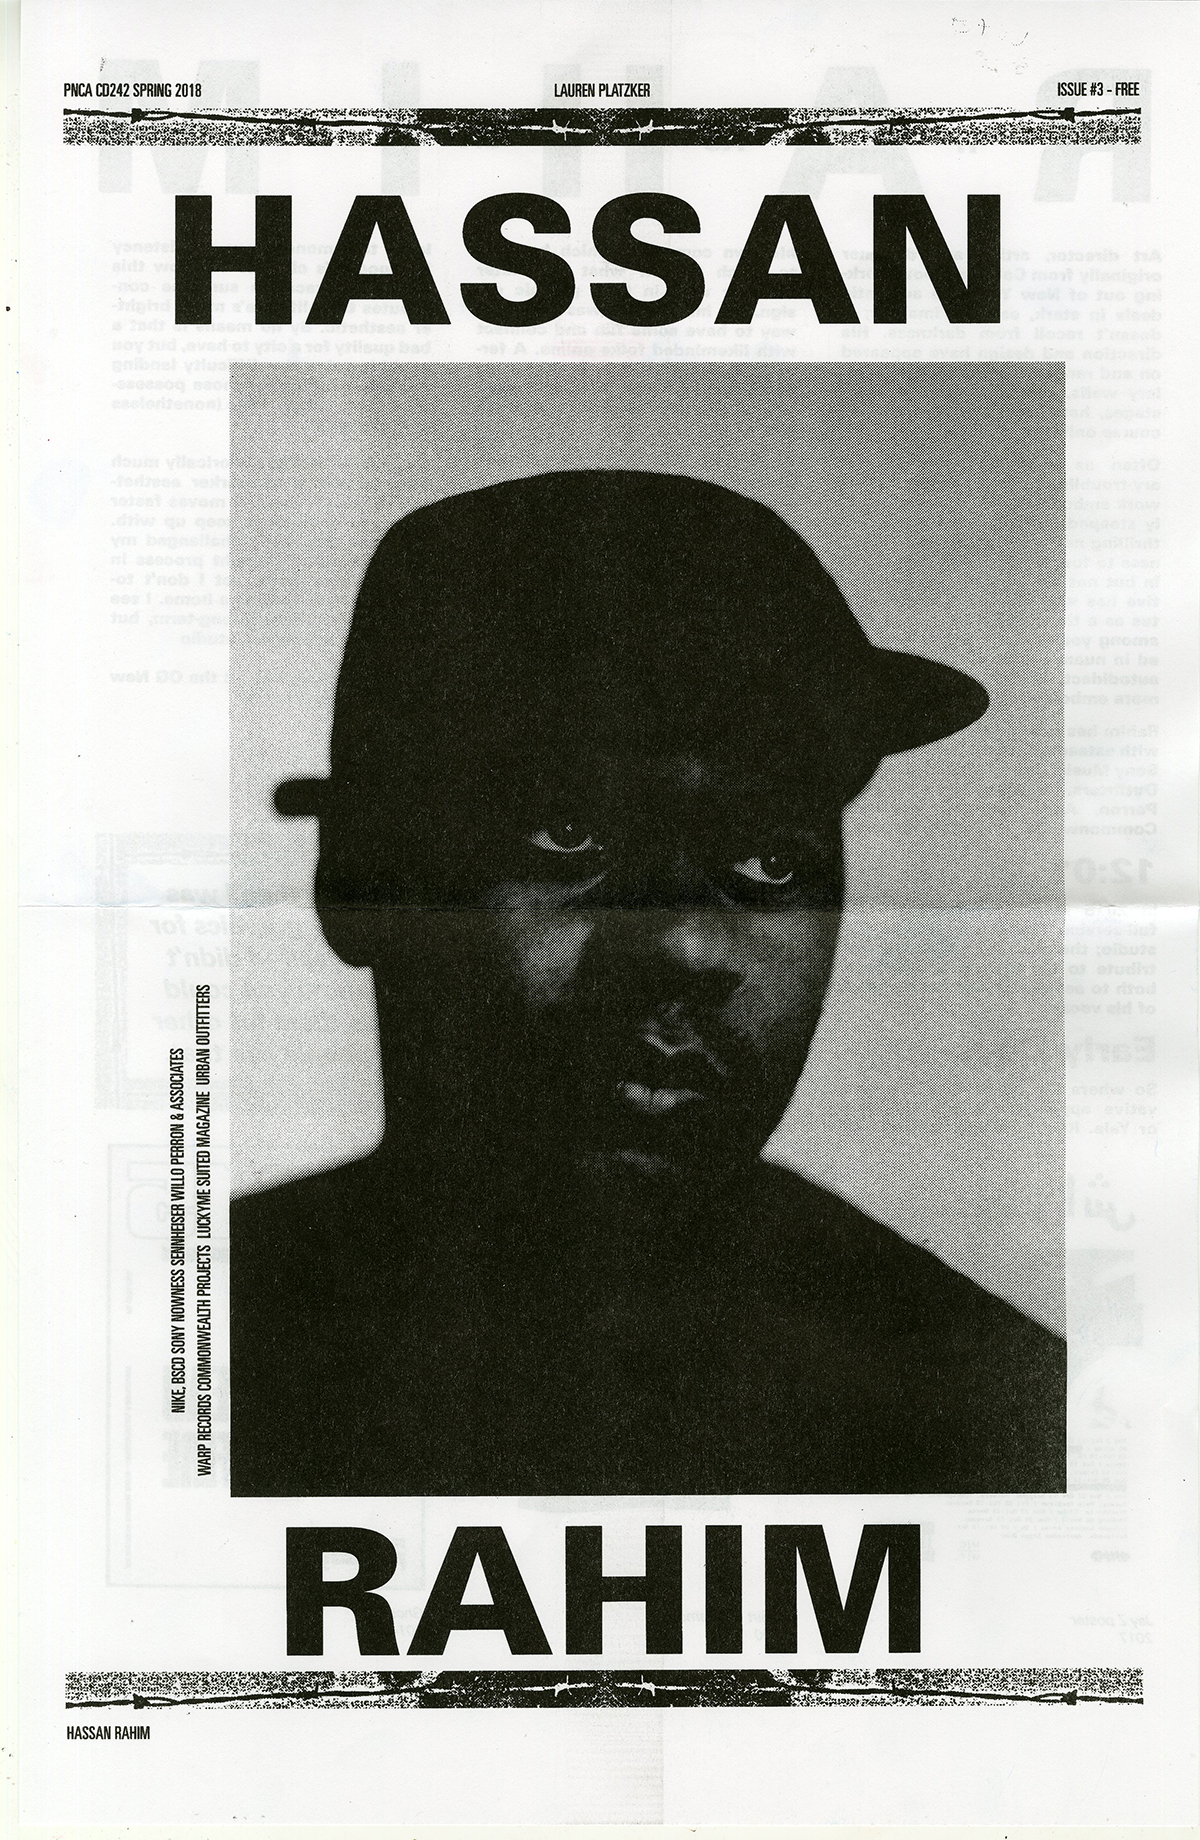 Black Monochromatic newsprint poster design with heavily saturated portrait, heavy font text reads 'Hassan Rahim'